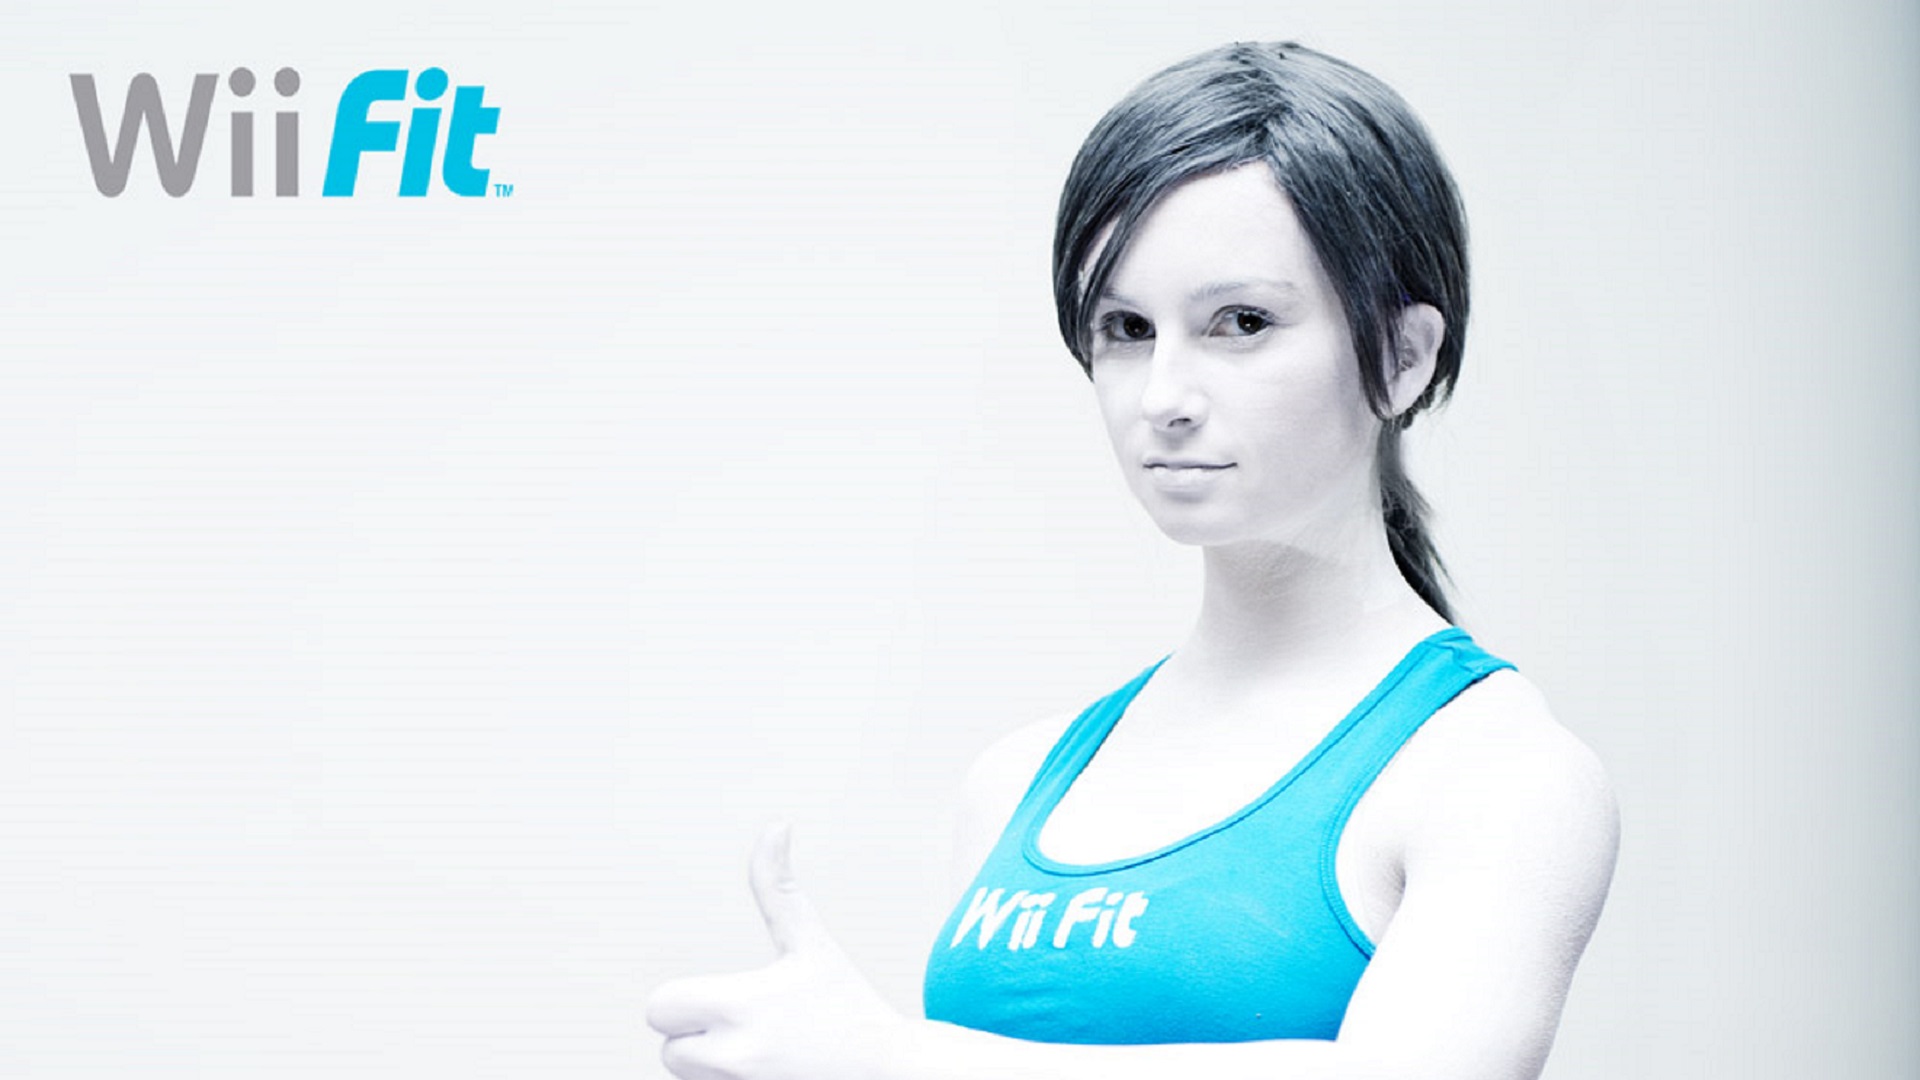 Wii fit. Wii Fit тренер. Wii Trainer Fit Cosplay. Тренер Wii Fit женщина. Тренер Wii Fit man.